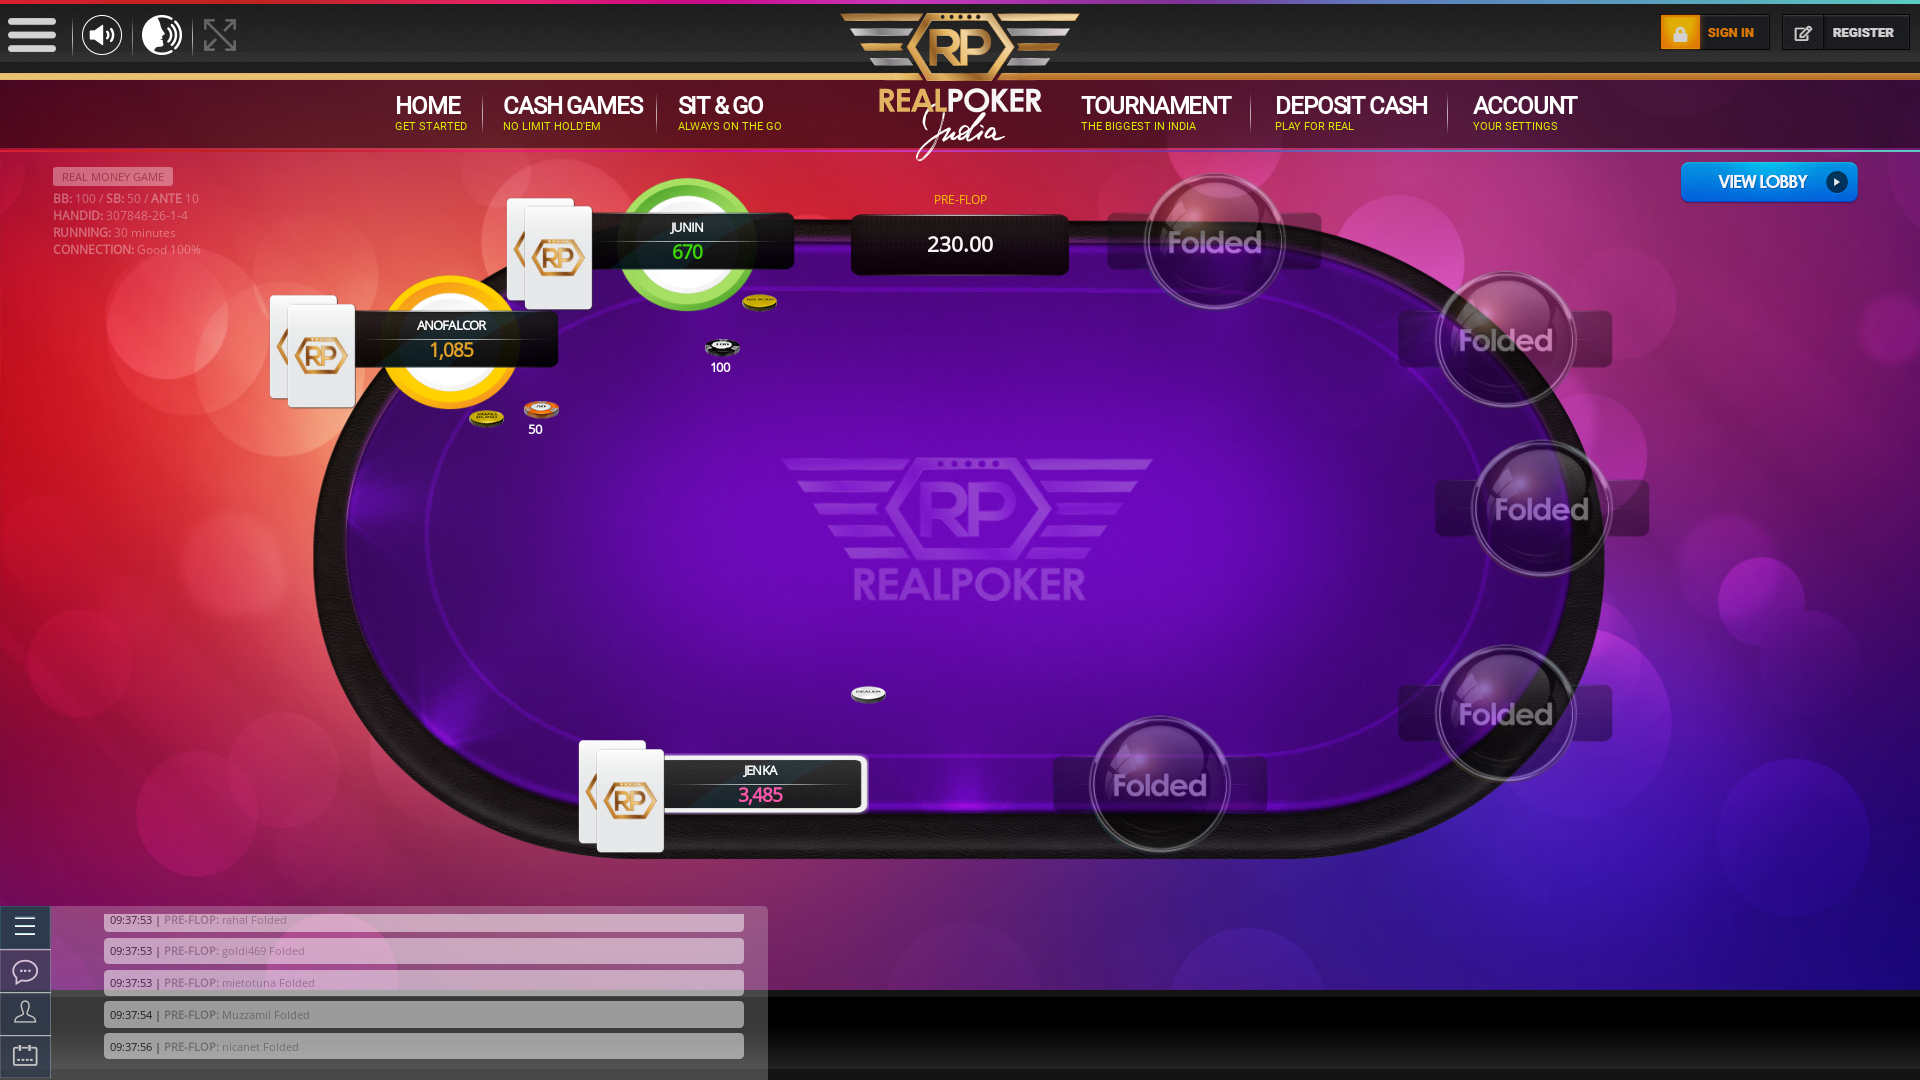 Indian poker on a 10 player table in the 30th minute